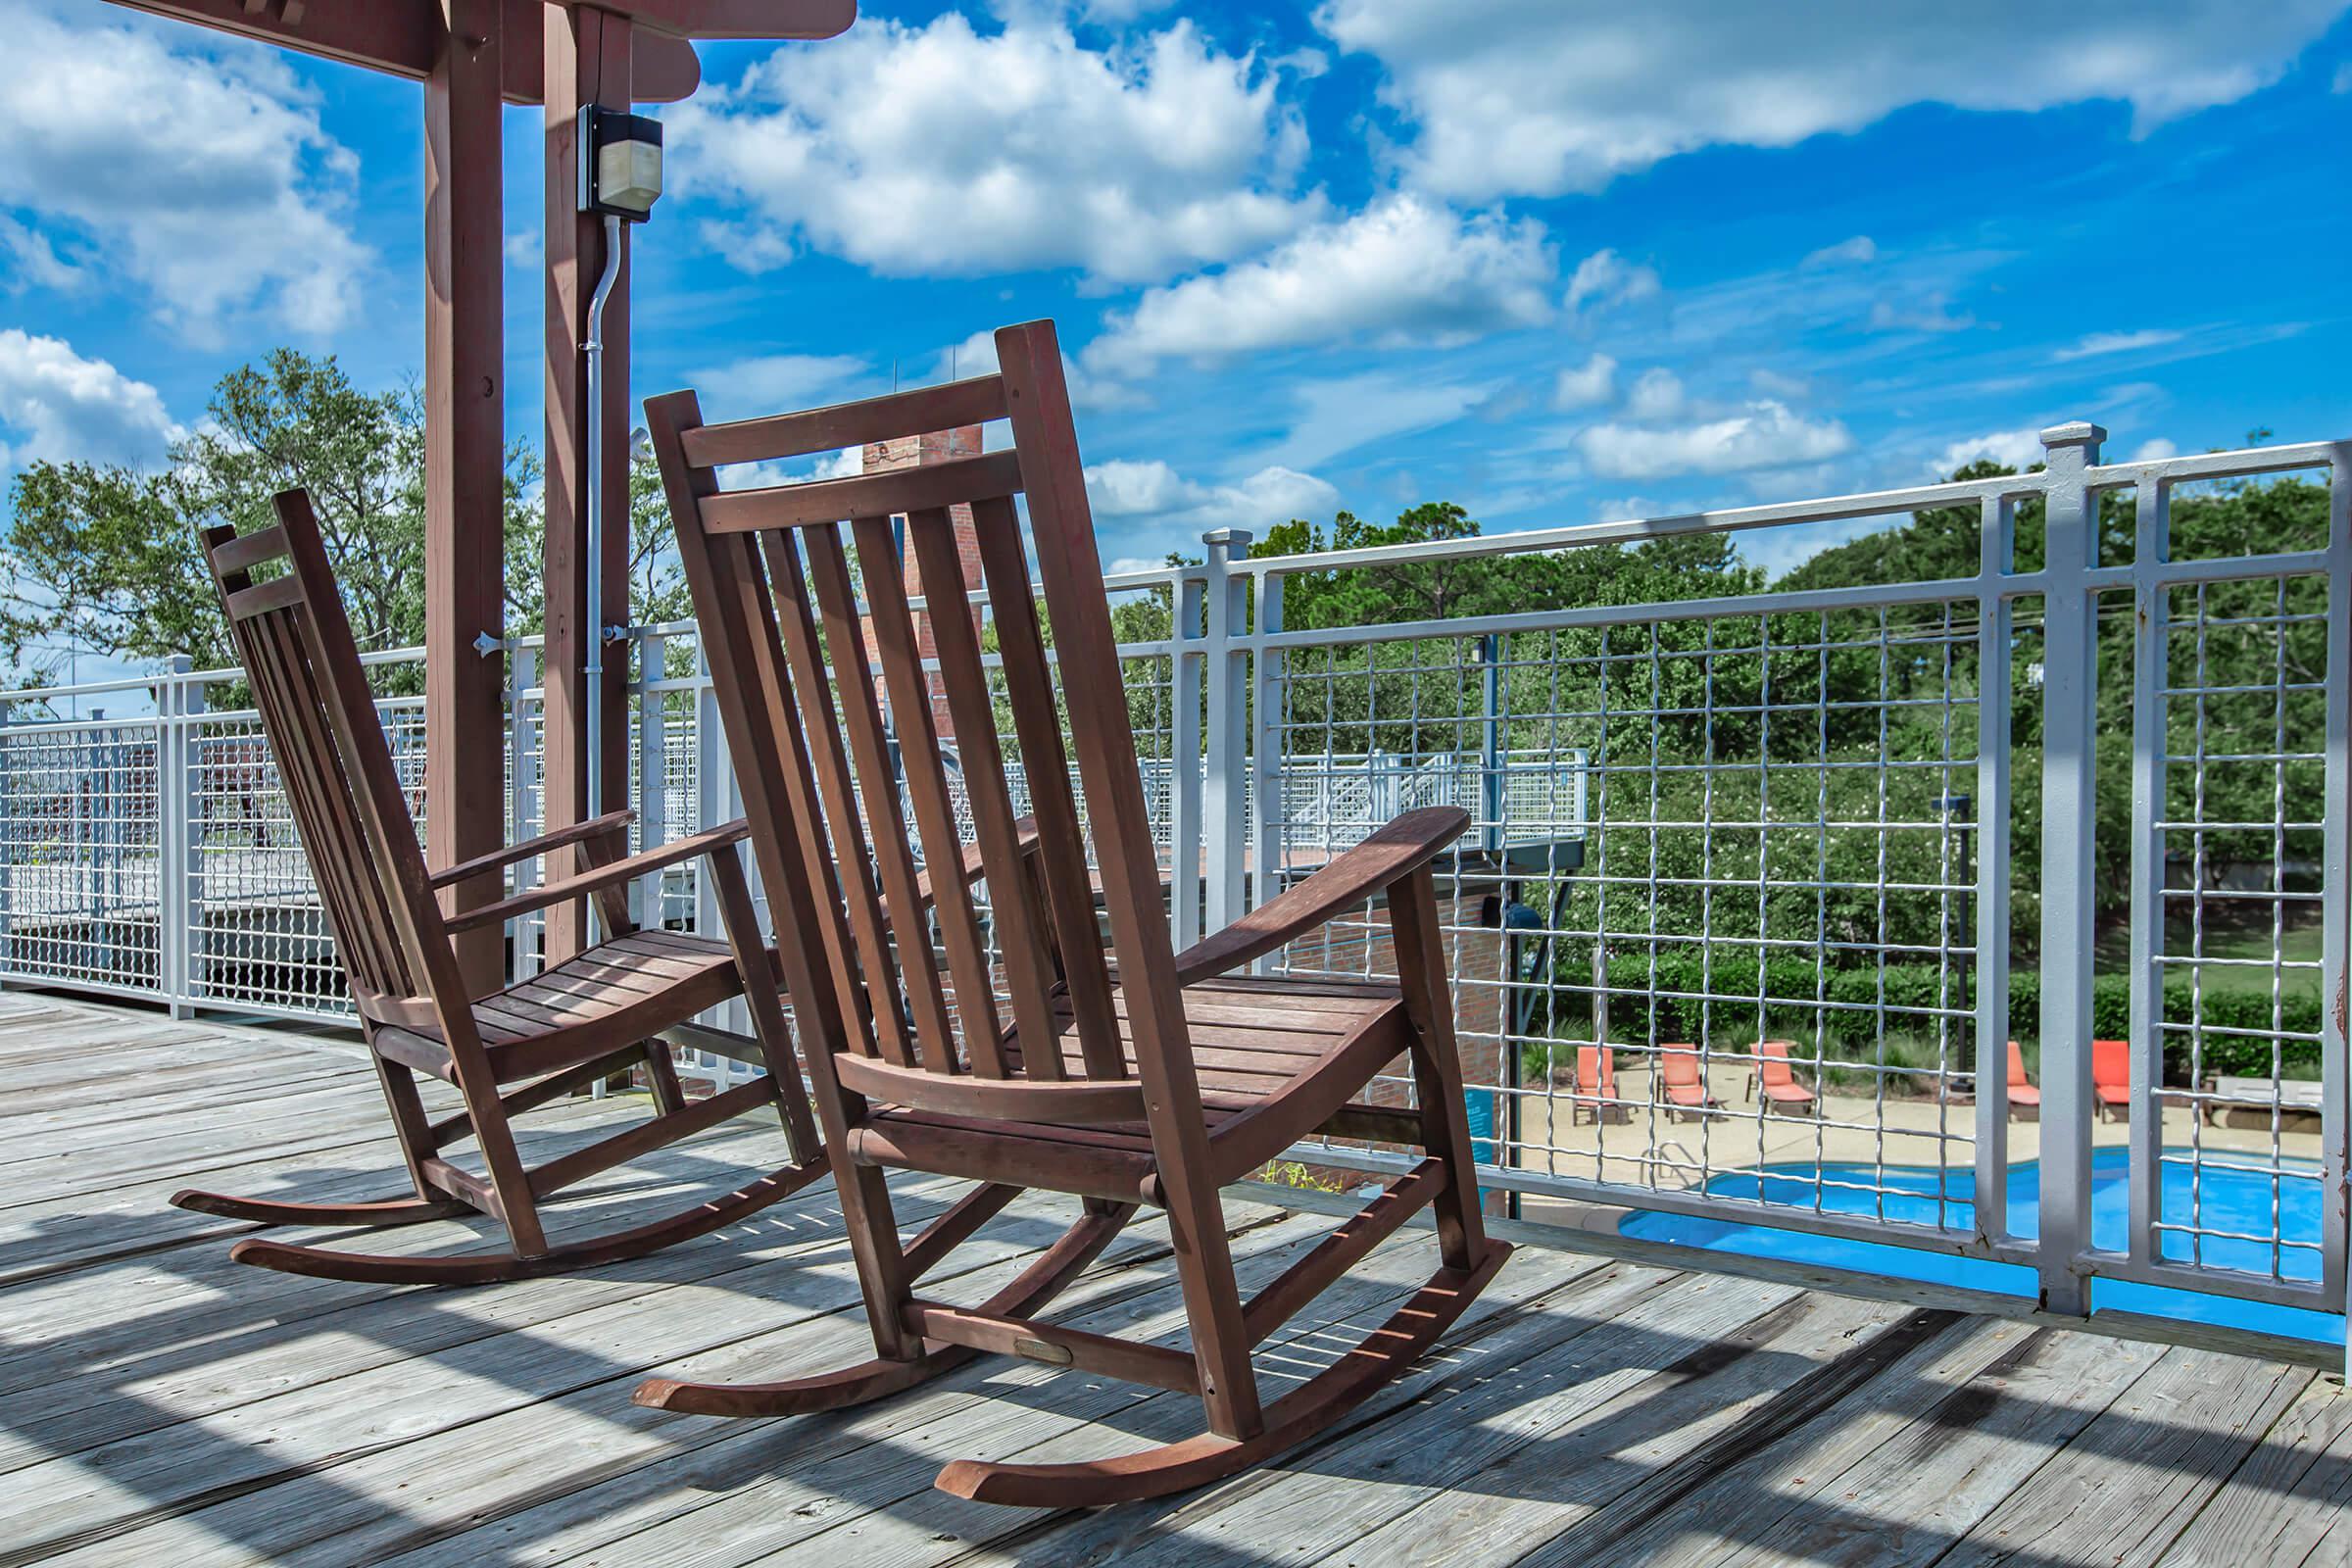 Enjoy the deck overlooking the shimmering swimming pool at South Front In Wilmington, North Carolina.